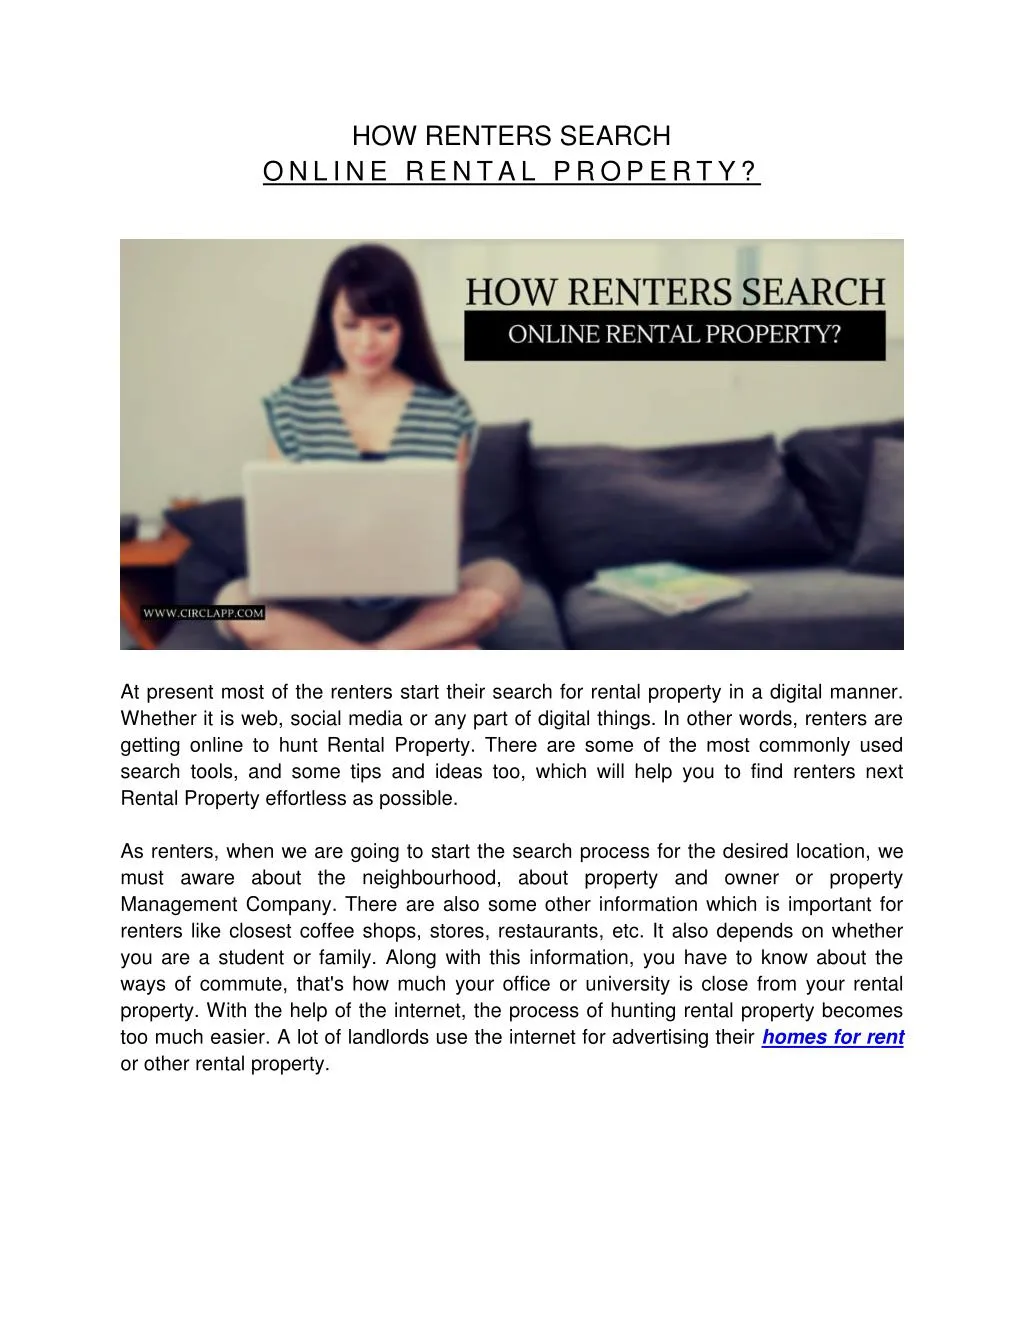 how renters search online rental property